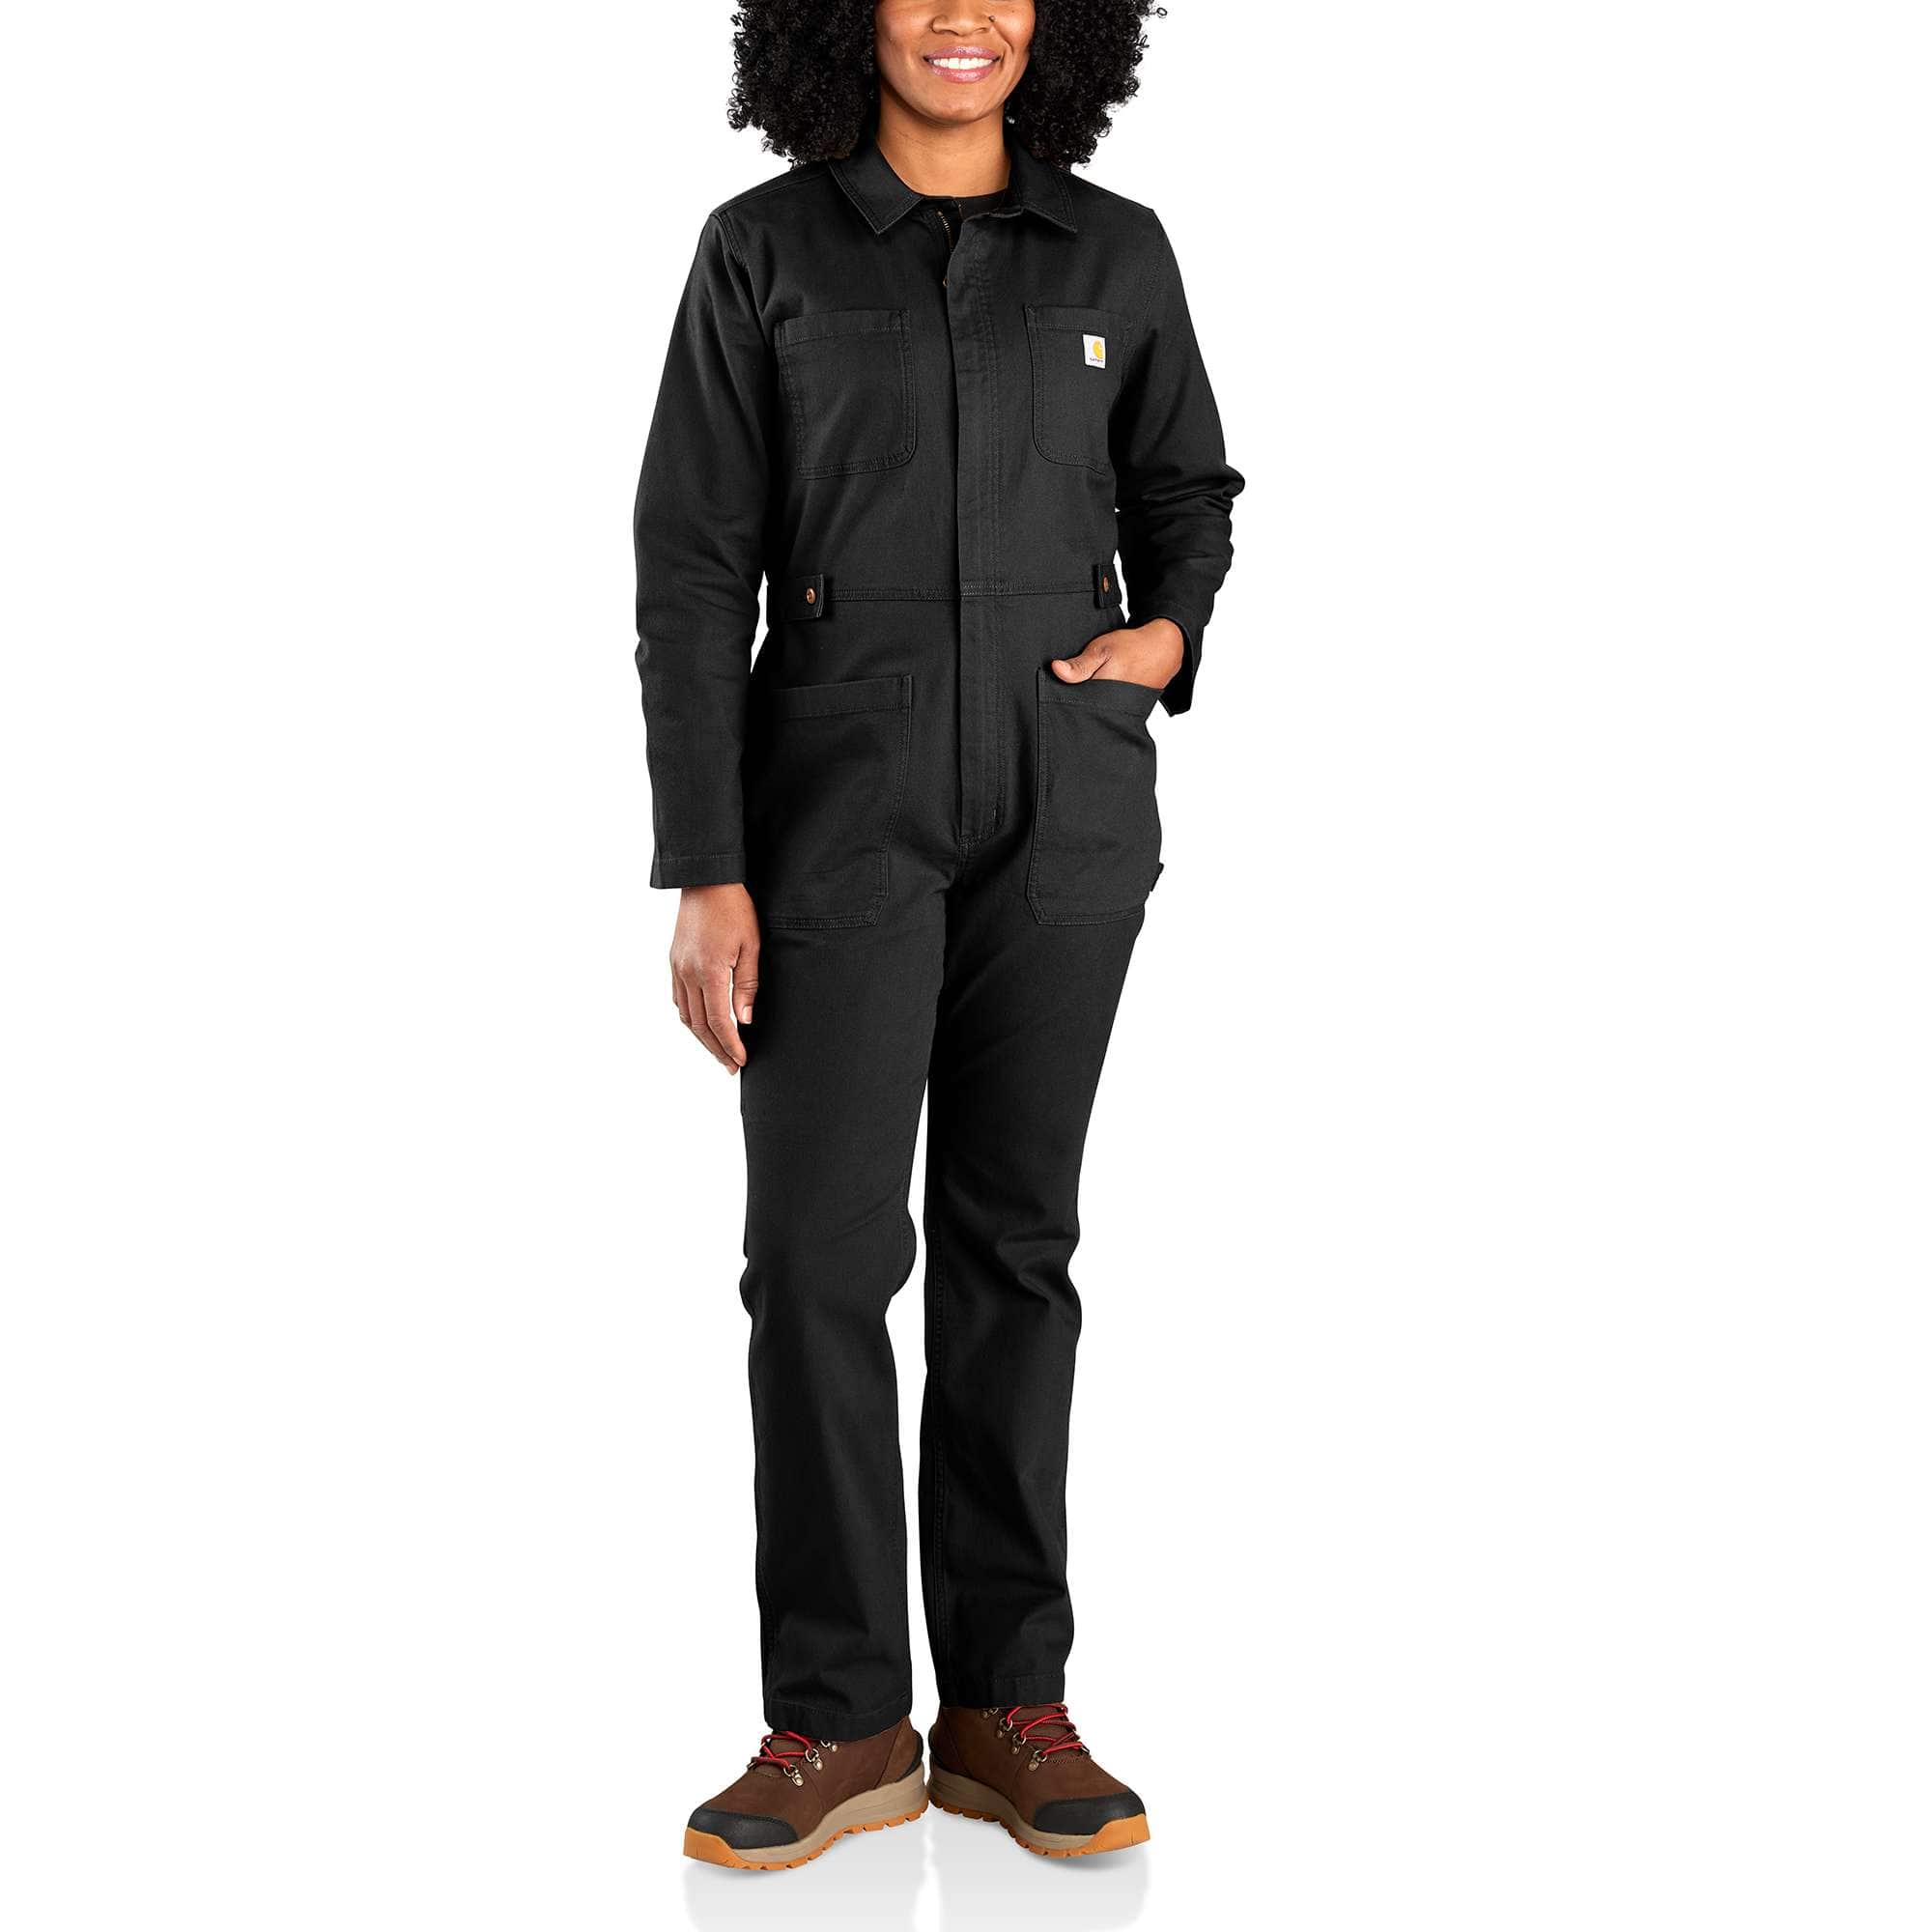 Insulated workwear overalls for the win. The fit on these Carhartt quilt  lined women's bibs is actually quite flattering. The 3M thin